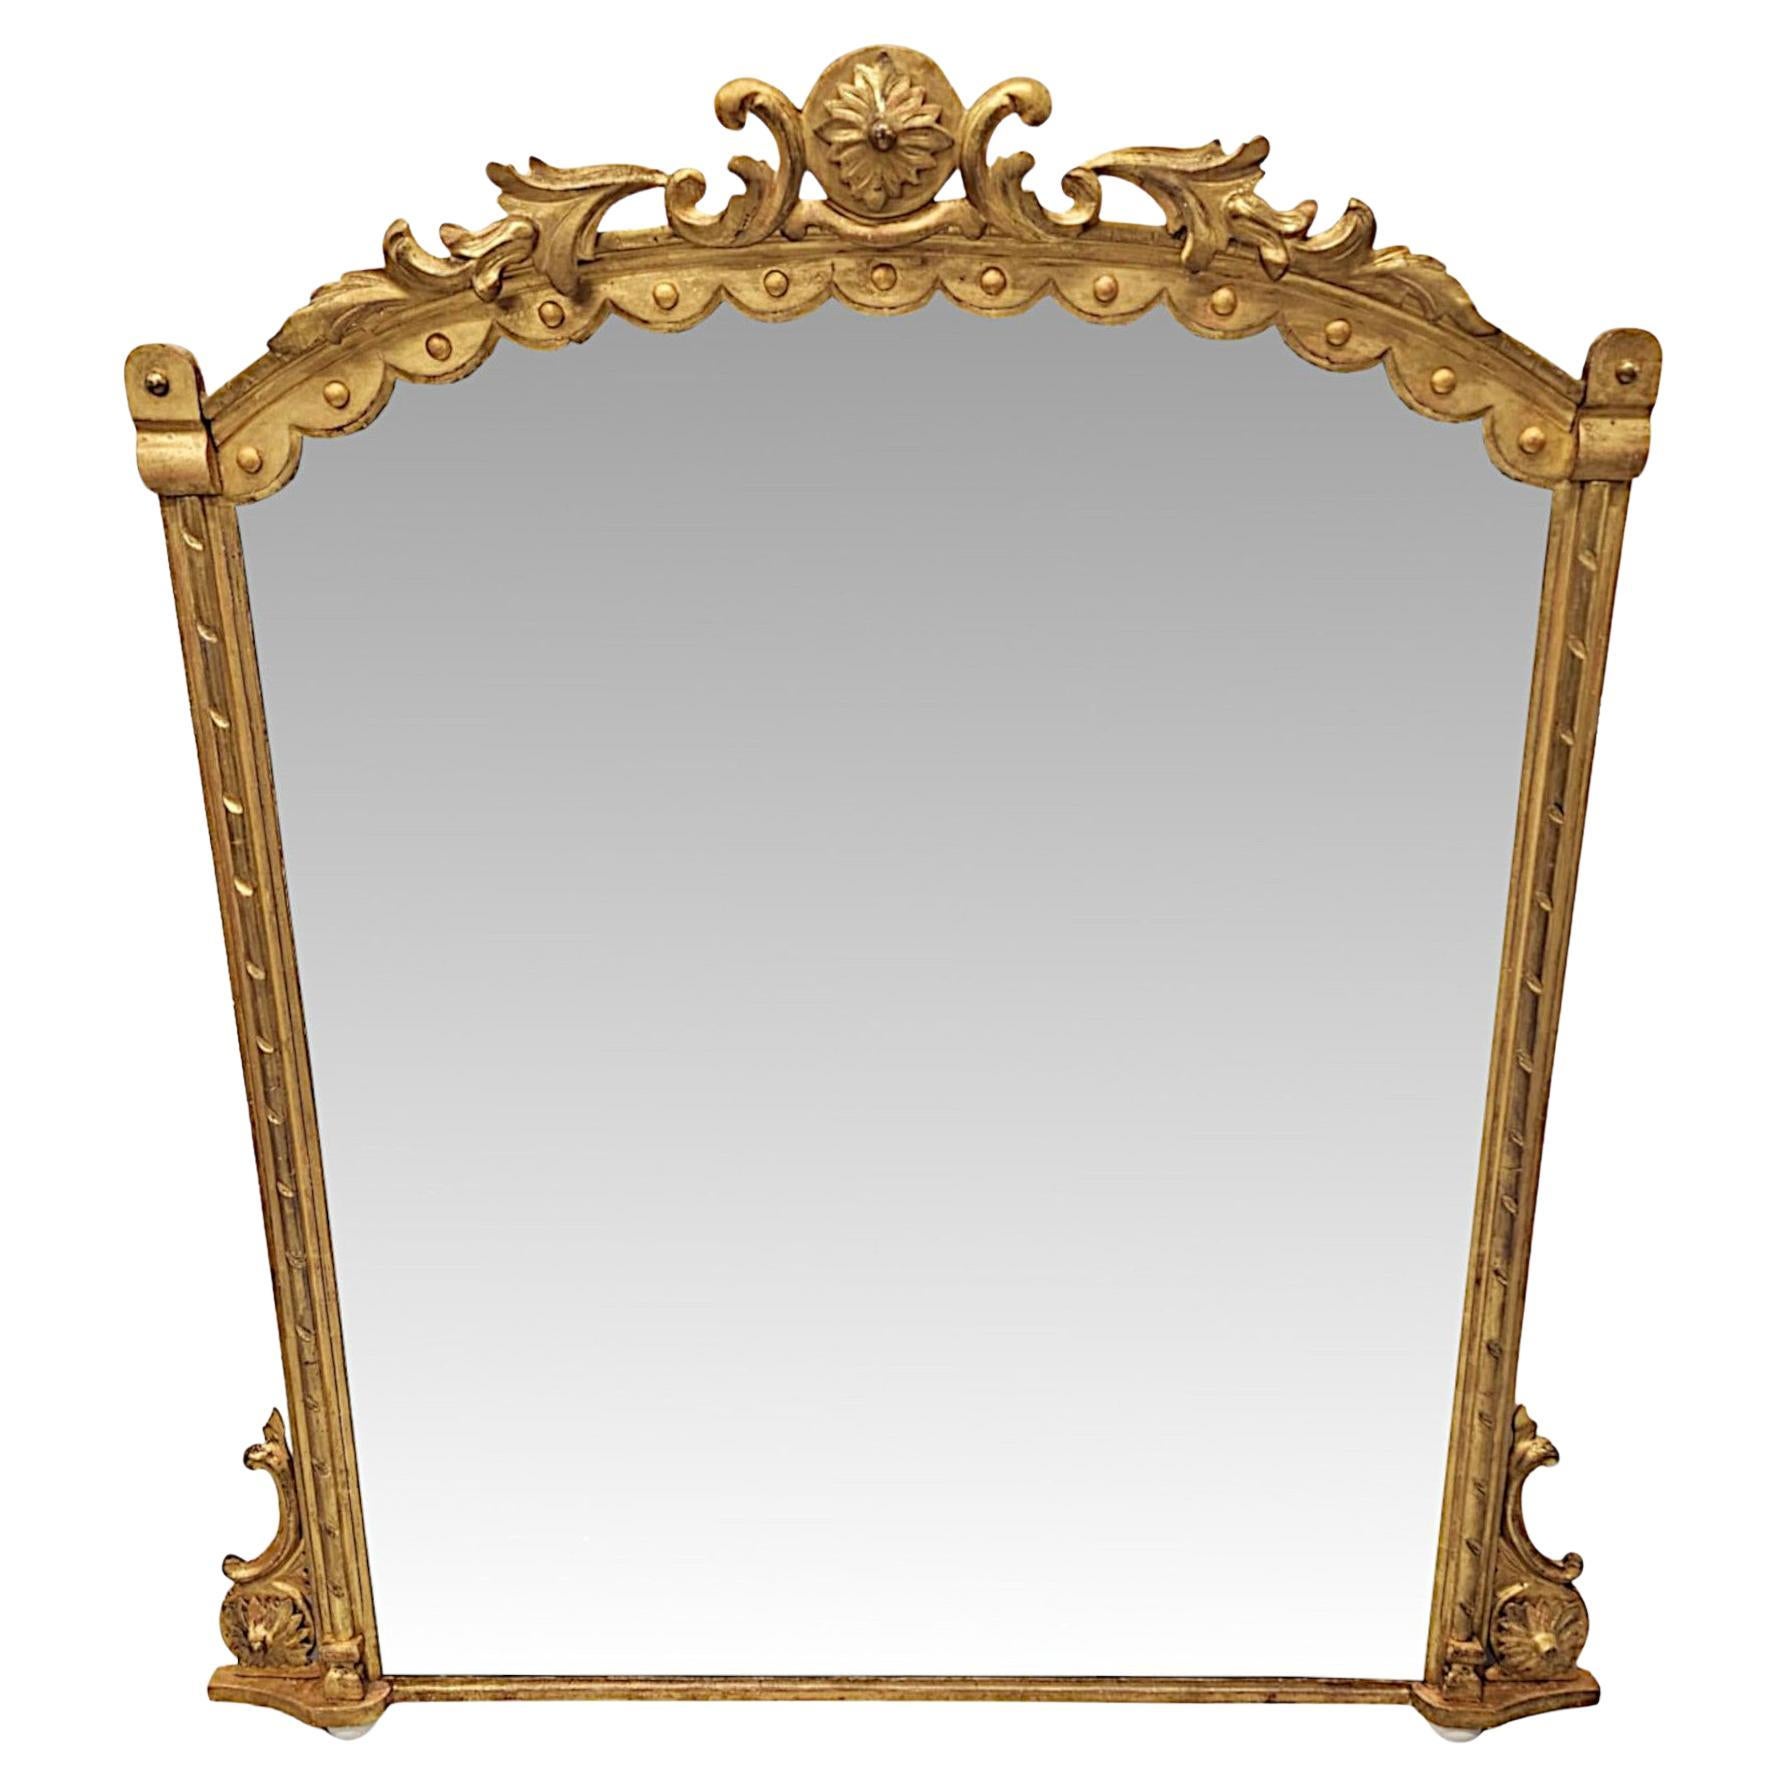 A Fabulous 19th Century Giltwood Overmantel Mirror For Sale